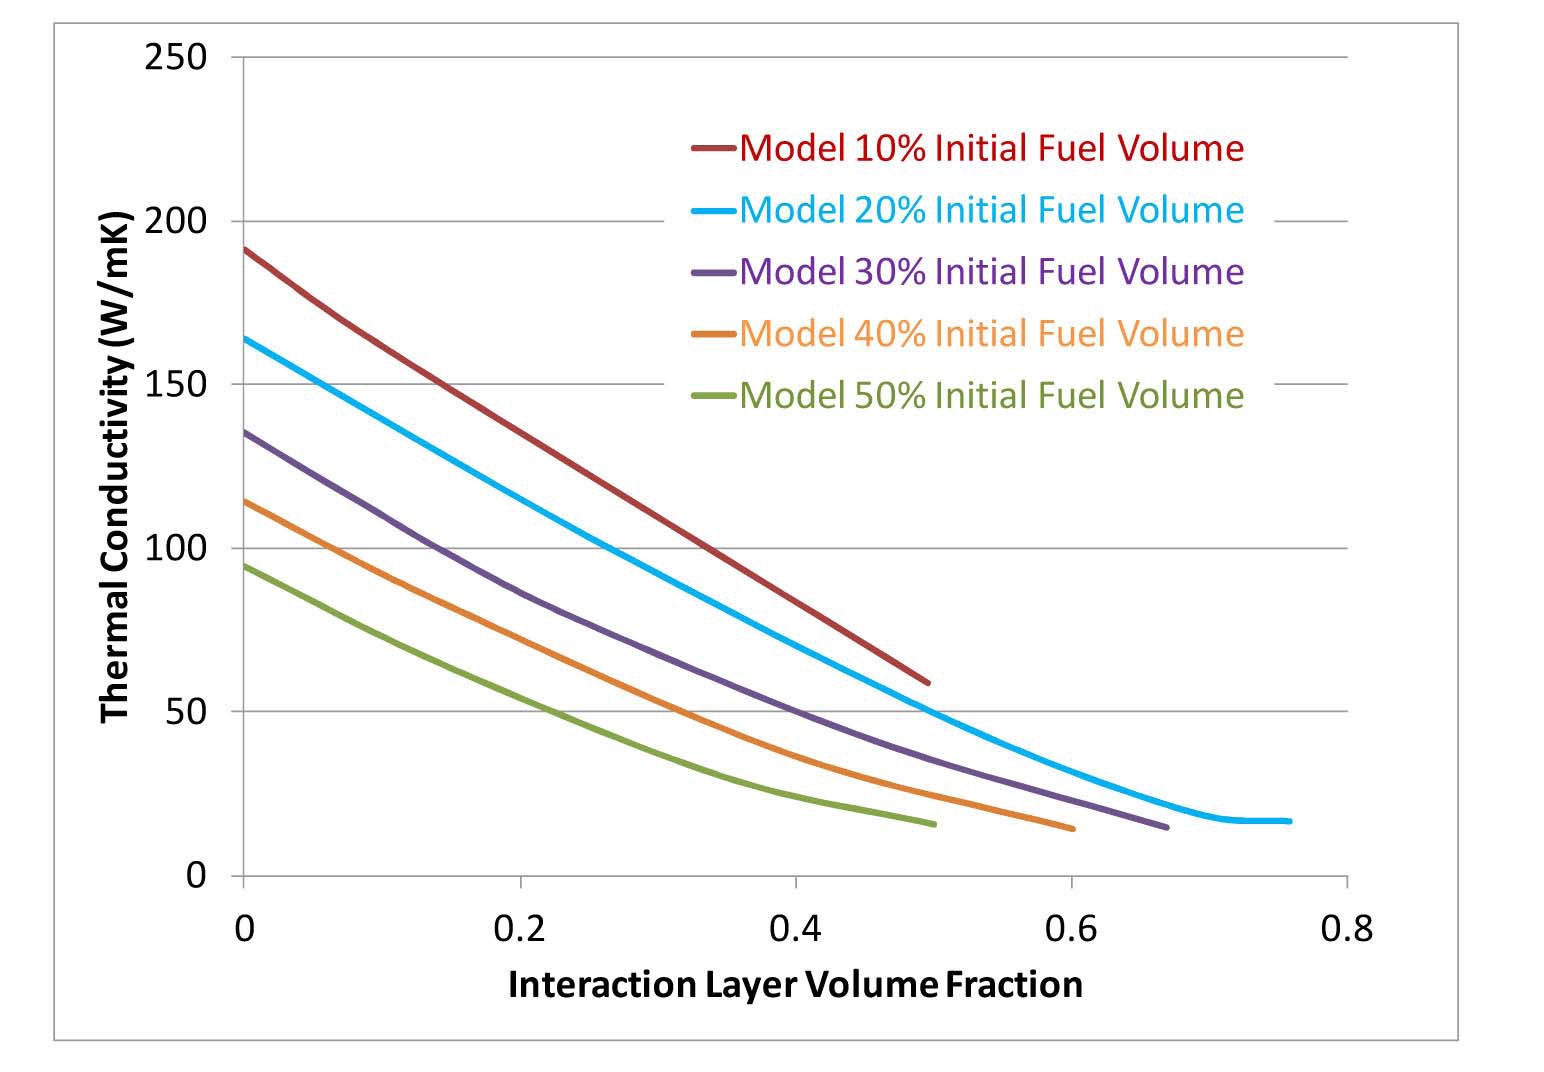 Effective Thermal Conductivity as a Function of the
Initial Fuel and Interaction Layer Volume Fraction. The
Values are Adjusted to Account for the Reduction in Fuel
Volume Fraction as the Interaction Layer Grows.